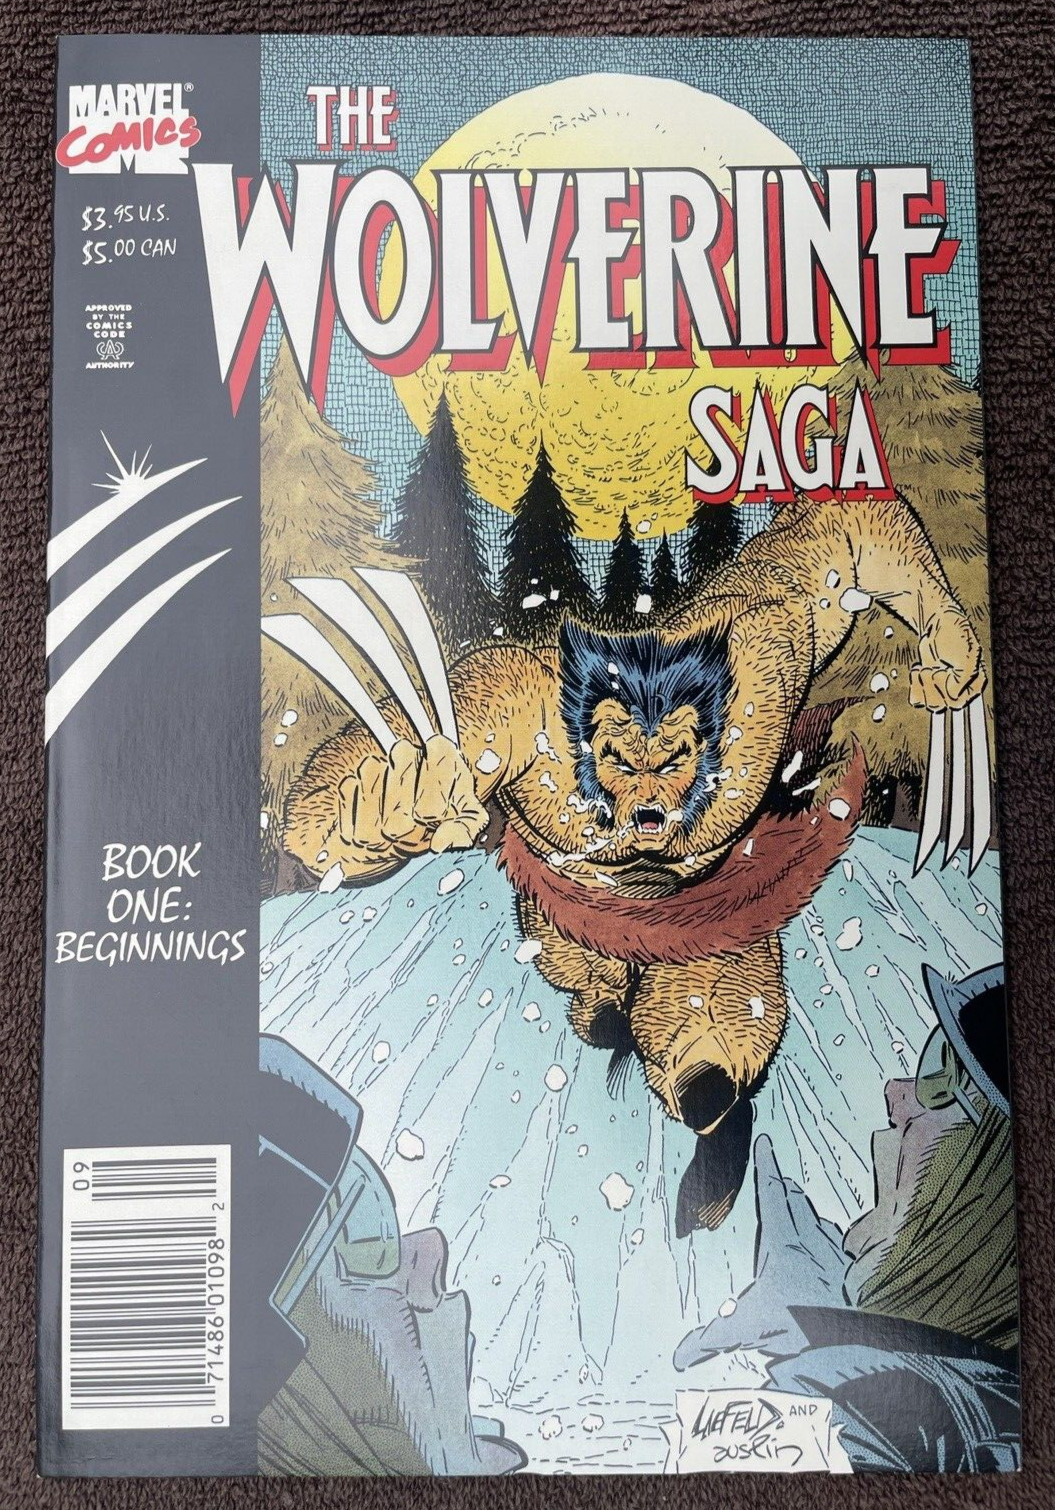 The Wolverine Saga #1 TPB (Marvel, 1989) Cover by Liefeld & Austin